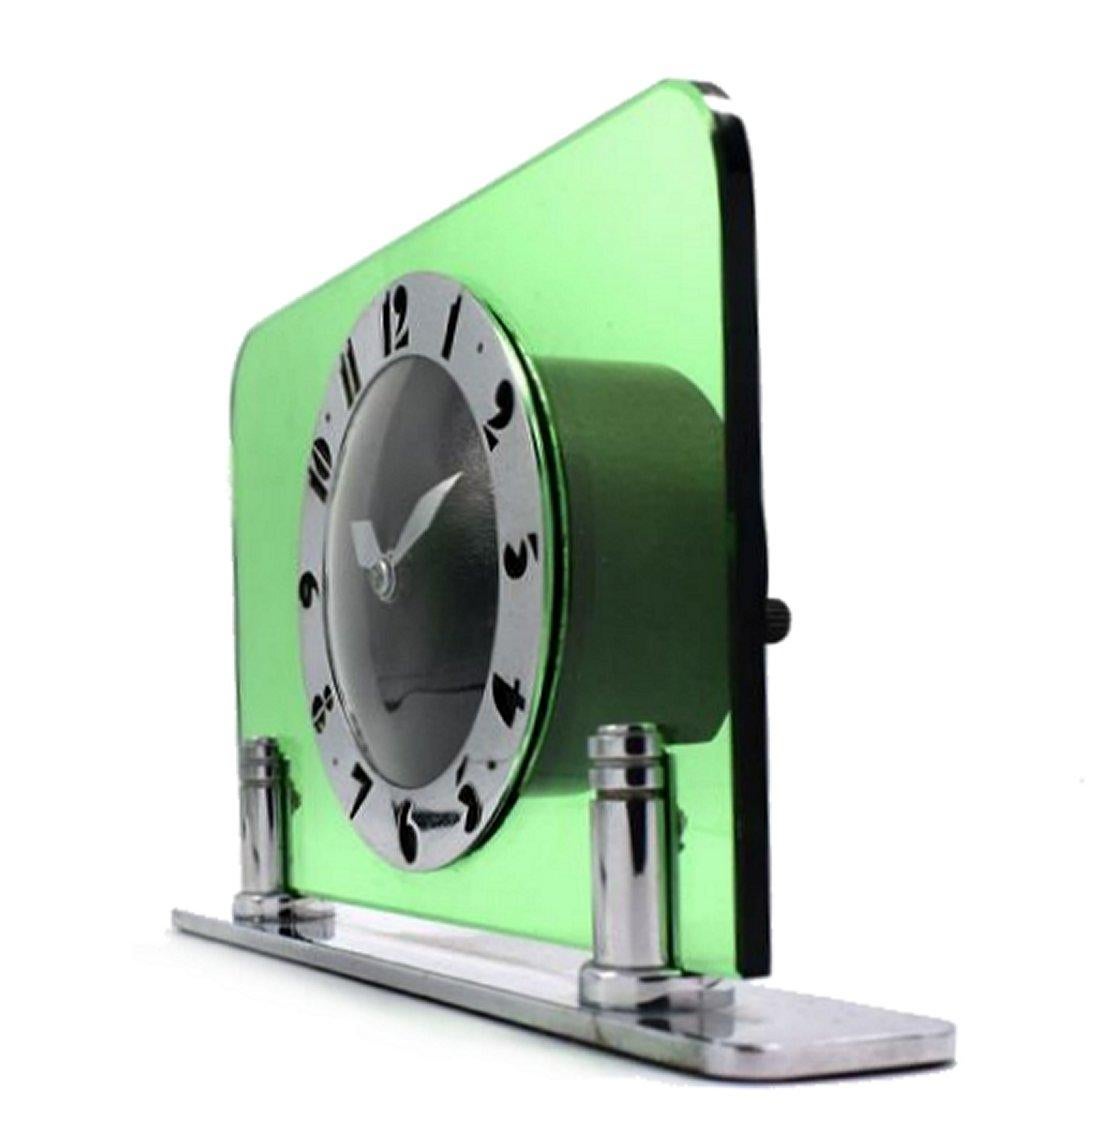 Art Deco Modernist Green Glass Electric Clock By Smiths Clockmakers, c1930 For Sale 3